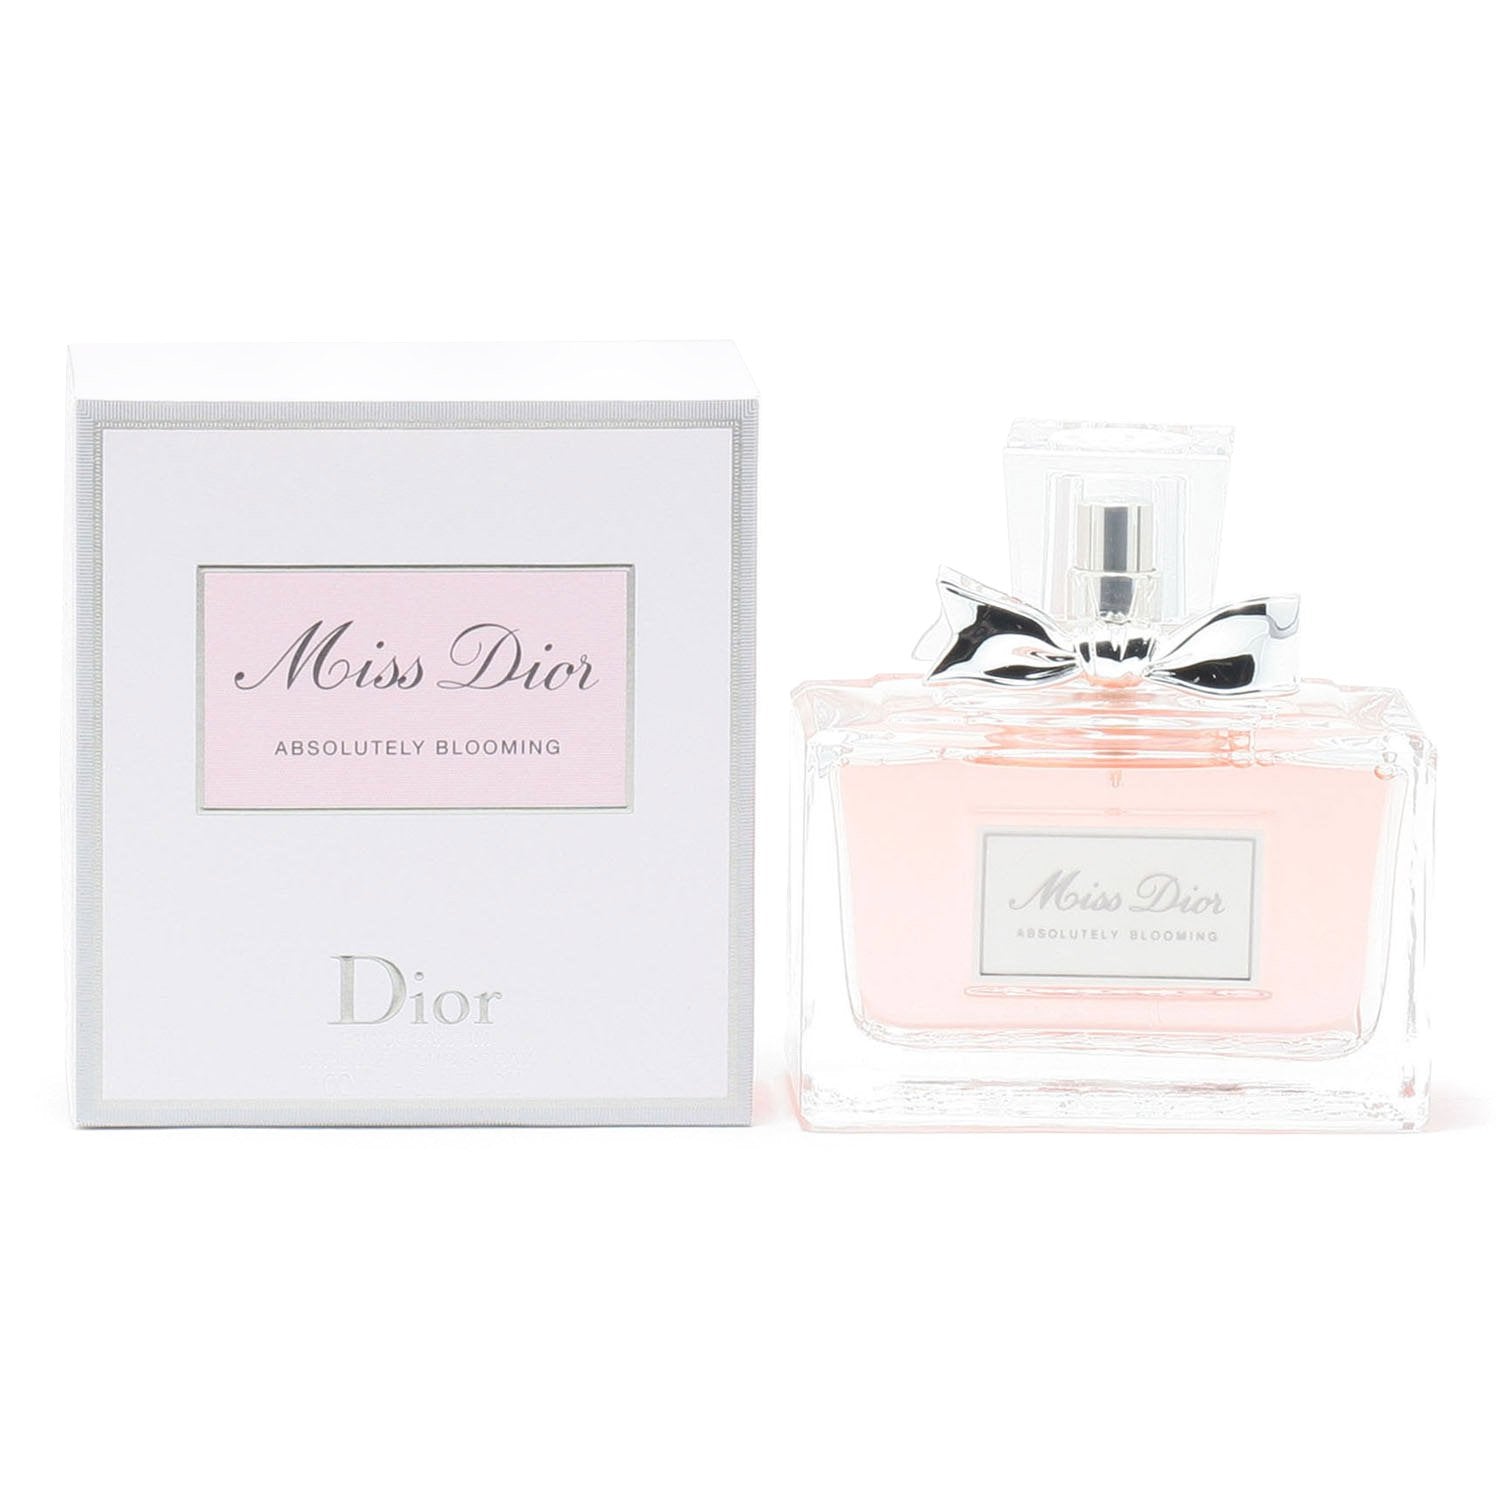 New Perfume to My Miss Dior Collection - Absolutely Blooming 